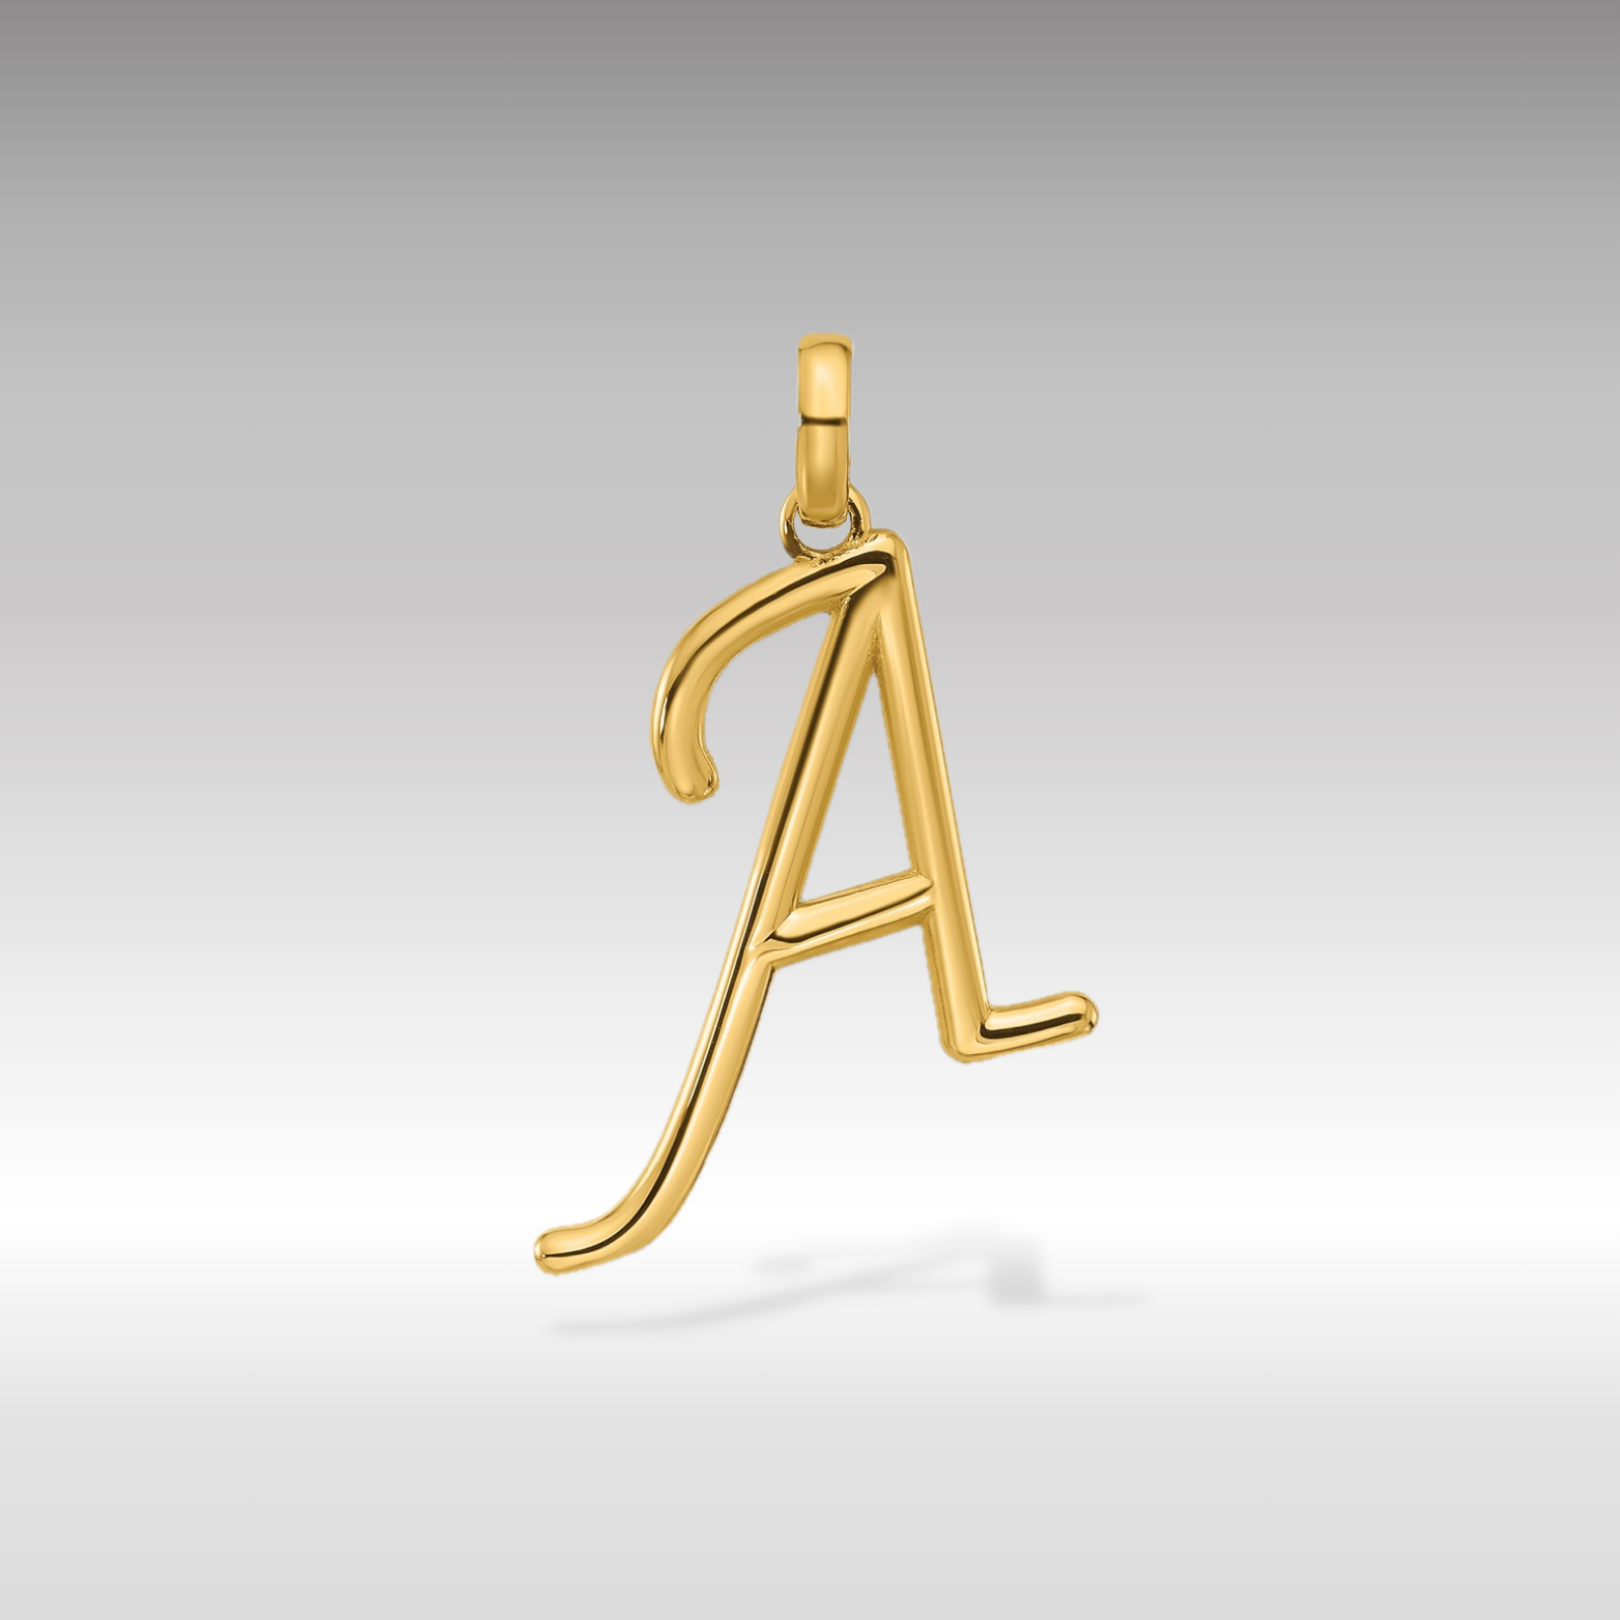 14K Gold Fancy Letter 'A' Charm Pendant - Charlie & Co. Jewelry